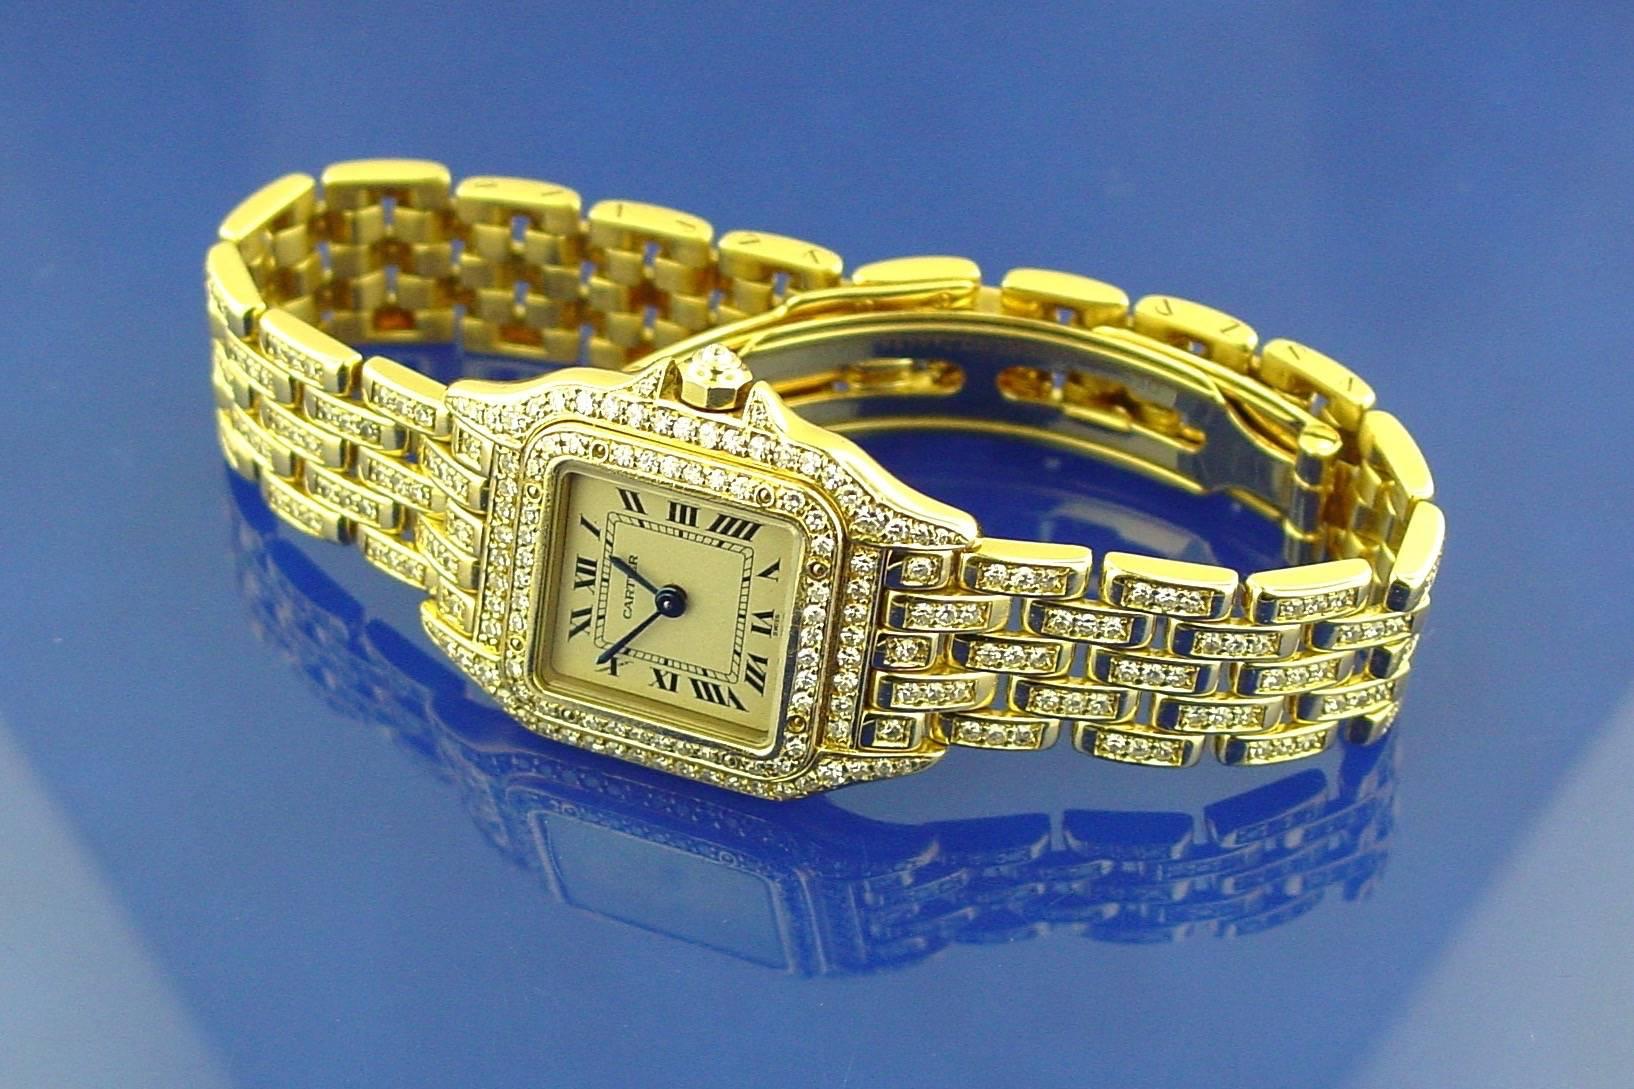 An 18 Karat Yellow Gold and Diamond Cartier Ladies Panthère Watch. This classic watch is sized for a 6.5